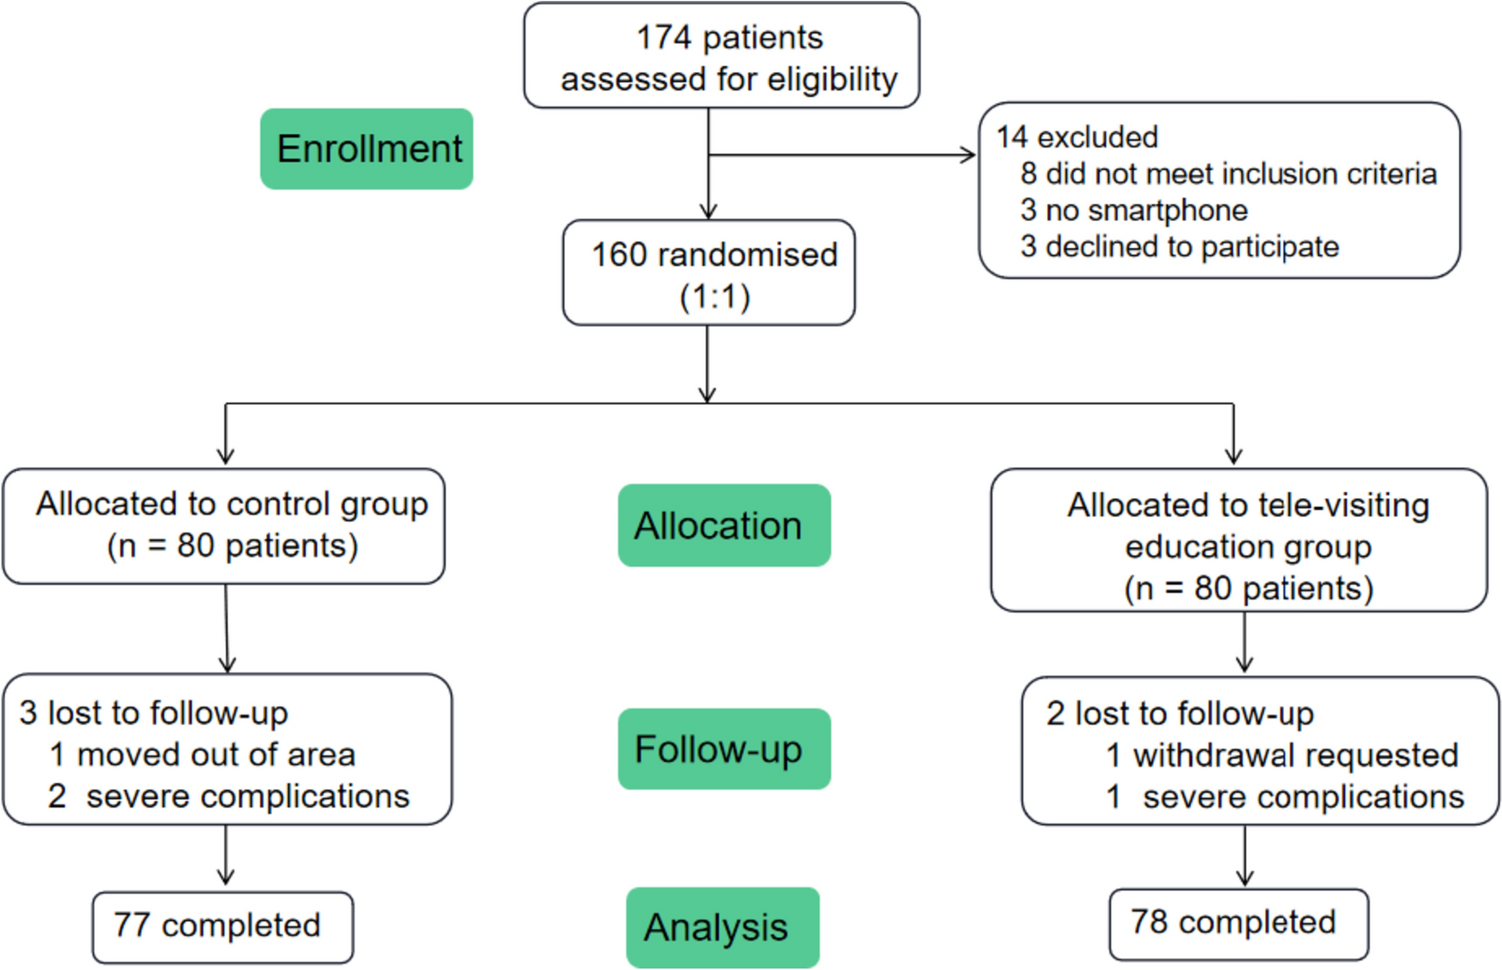 The impact of telehealth education on self-management in patients with coexisting type 2 diabetes mellitus and hypertension: a 26-week randomized controlled trial